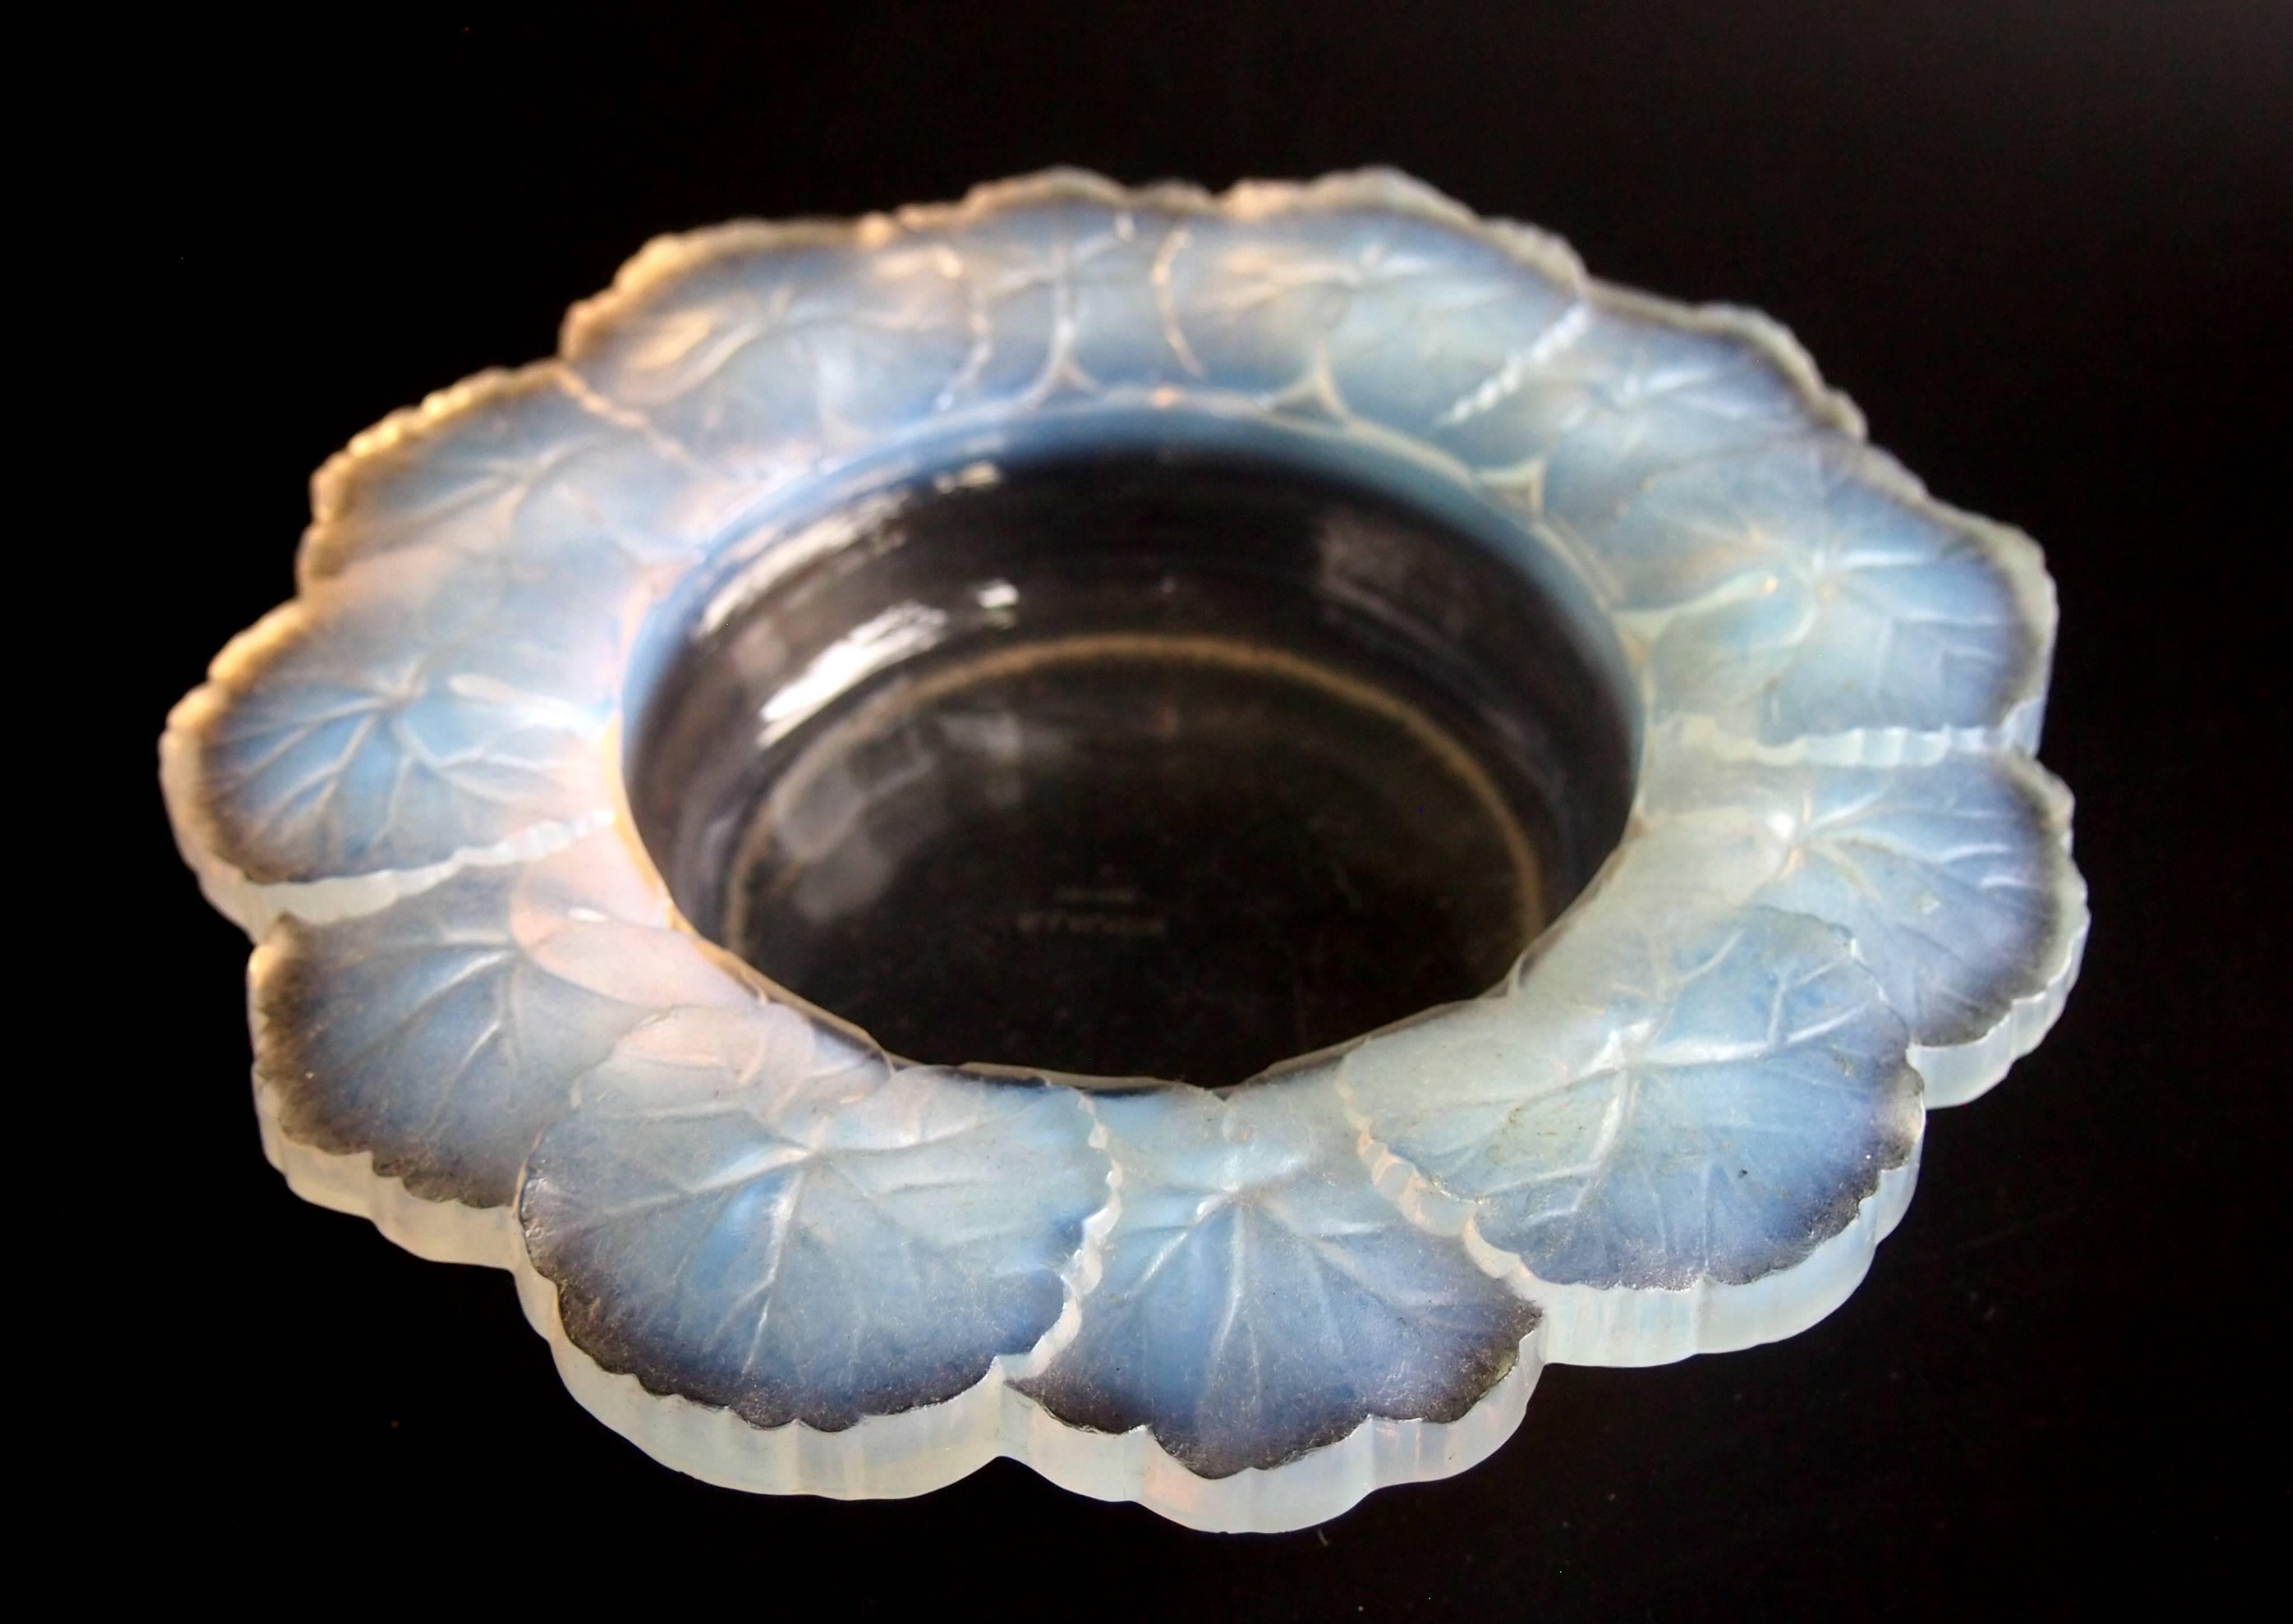 A super signed late Art Deco opal Rene Lalique Honfleur bowl, dating from 1945. The opalescence is particularly good in this example. This bowl is just at the transition between Rene Lalique and his son Marc -it is rarely seen opalescent.

Rene